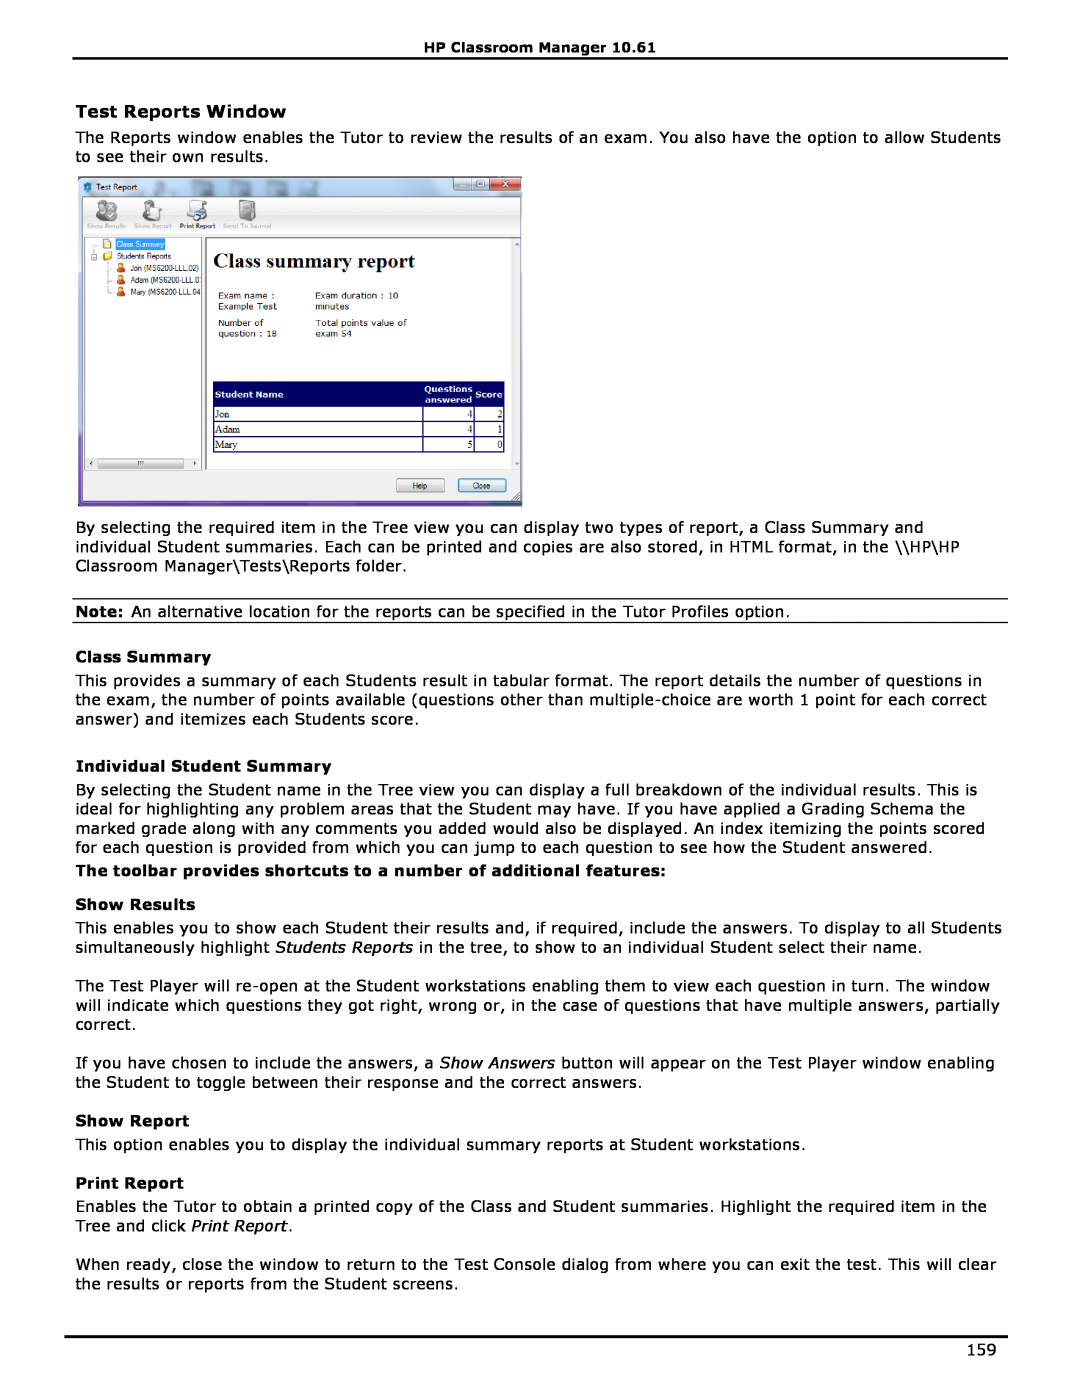 HP Classroom Manager manual Test Reports Window, Class Summary, Individual Student Summary, Show Results, Show Report 